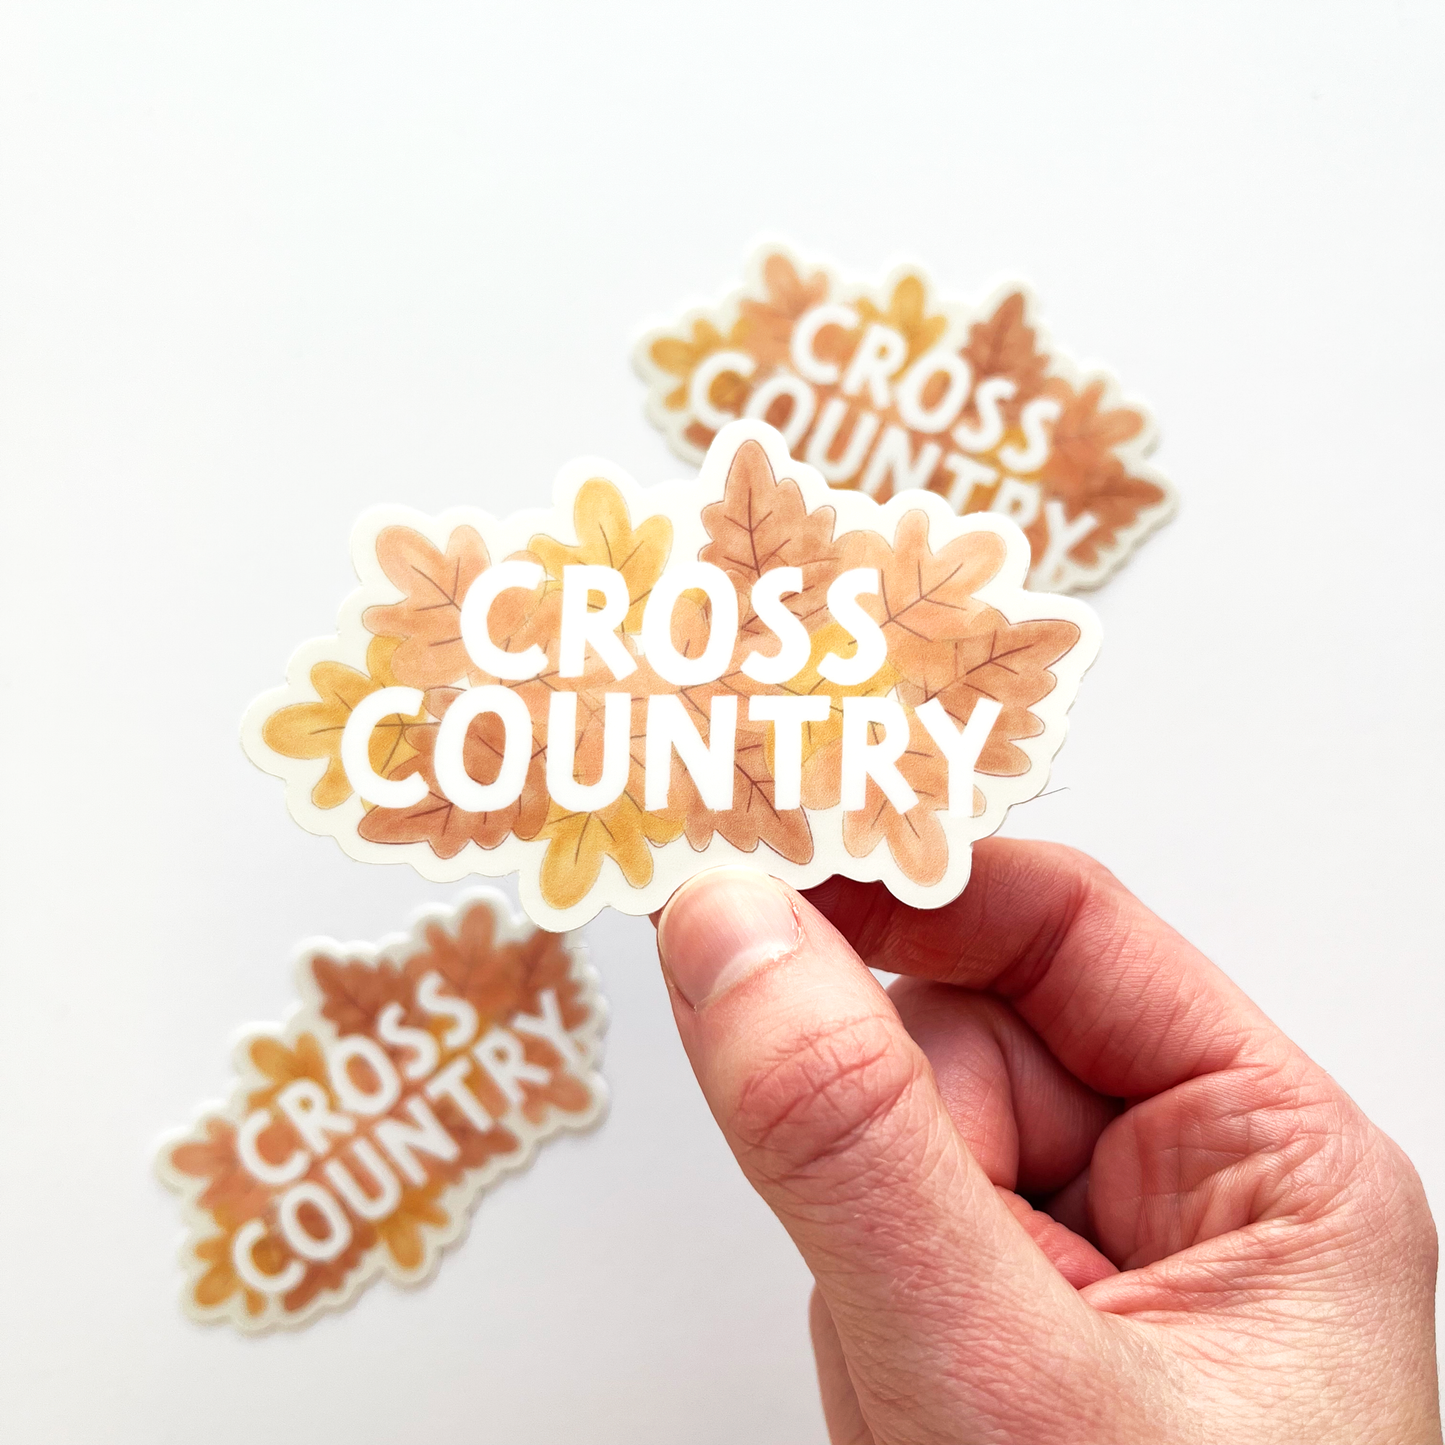 Cross Country sticker with white text and a leafy background with colors of light pink, peach and orange